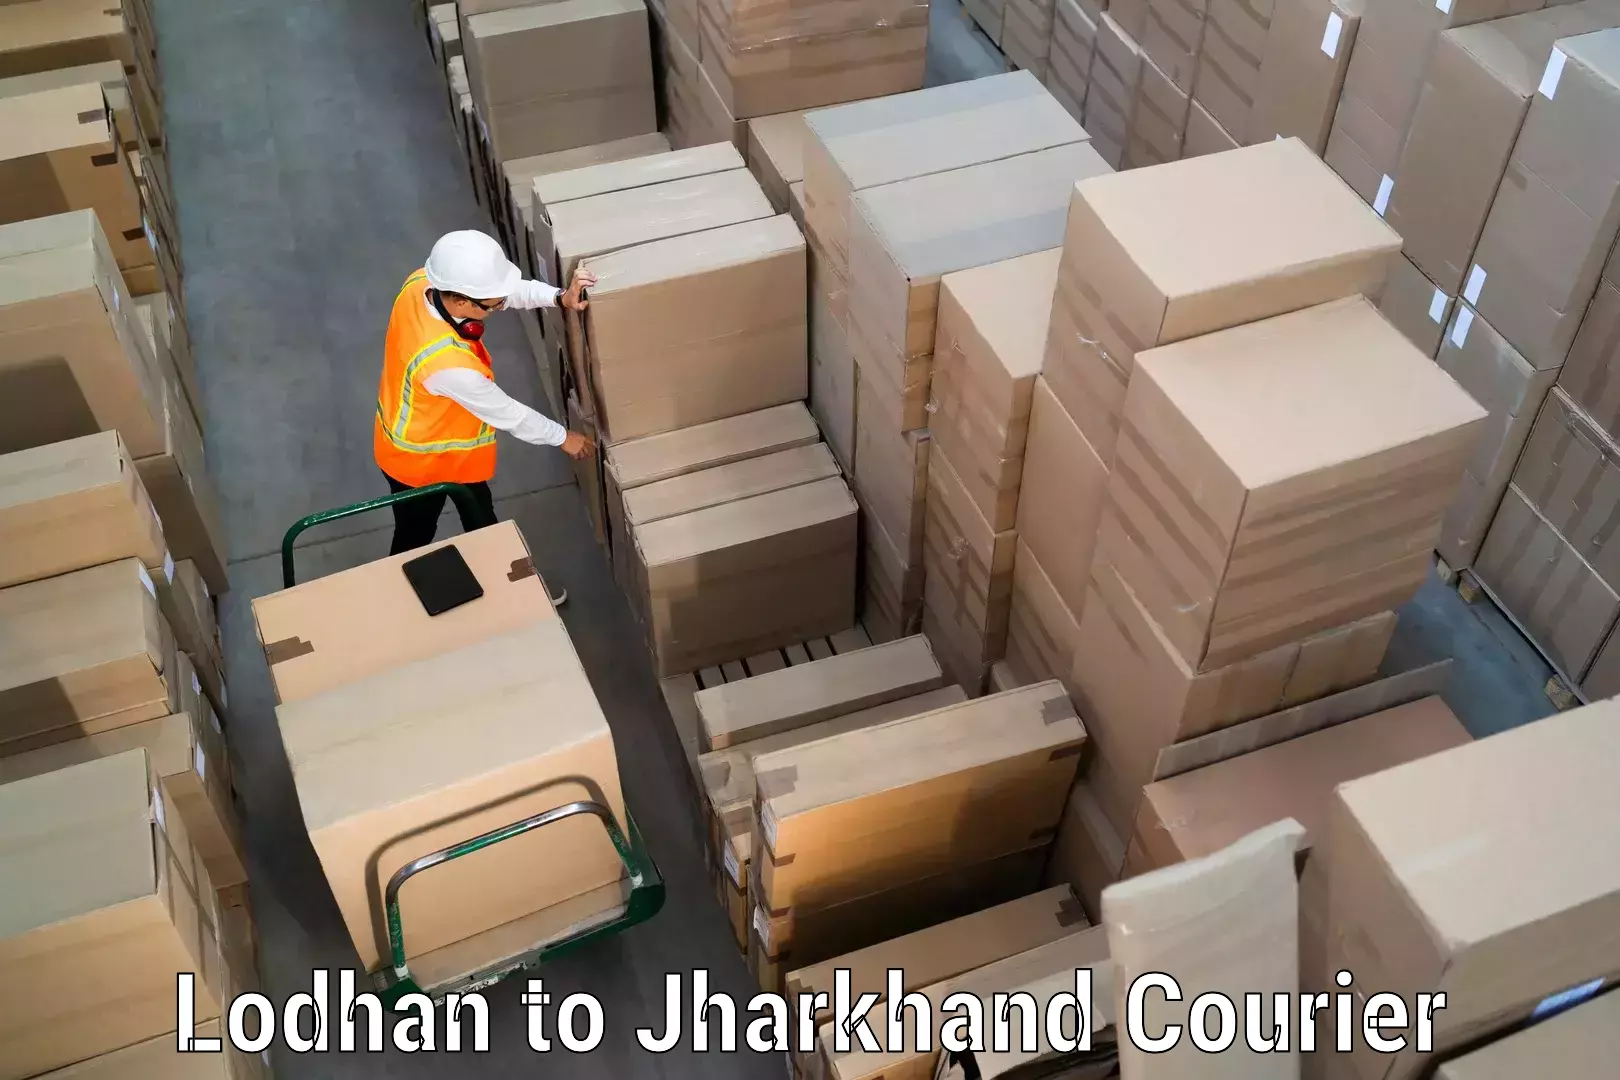 Courier service efficiency Lodhan to Seraikella